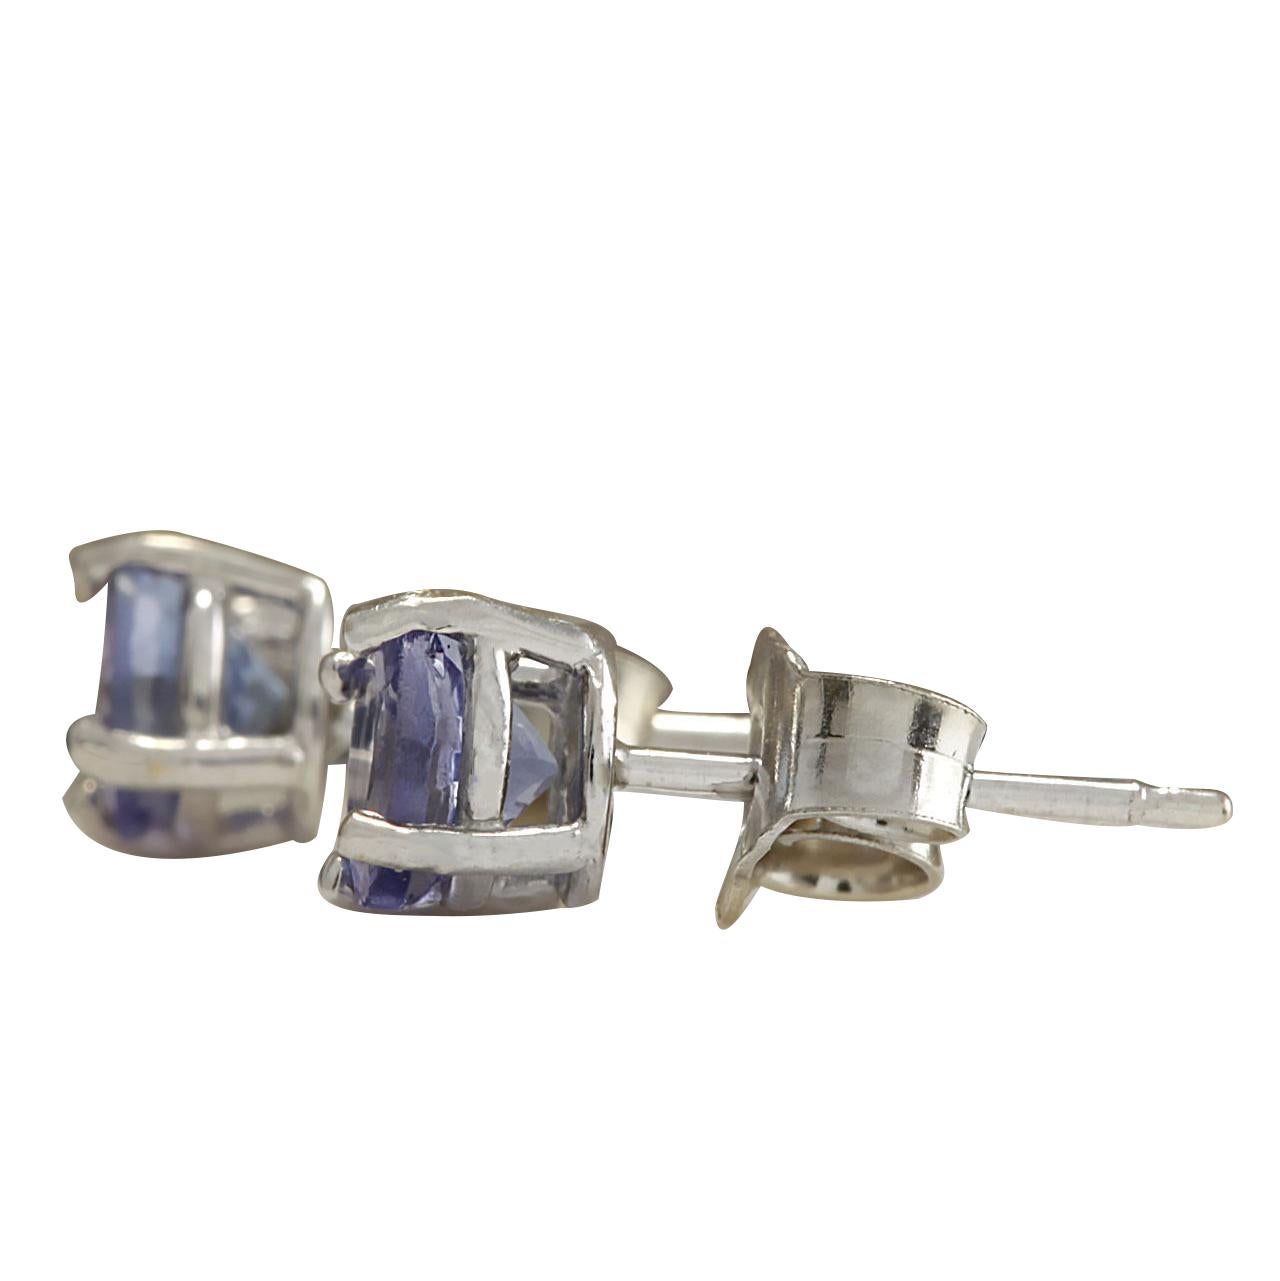 Stamped: 14K White Gold
Total Earrings Weight: 1.0 Grams
Total Natural Tanzanite Weight is 1.00 Carat (Measures: 5.00x5.00 mm)
Color: Blue
Face Measures: 5.00x5.00 mm
Sku: [703169W]